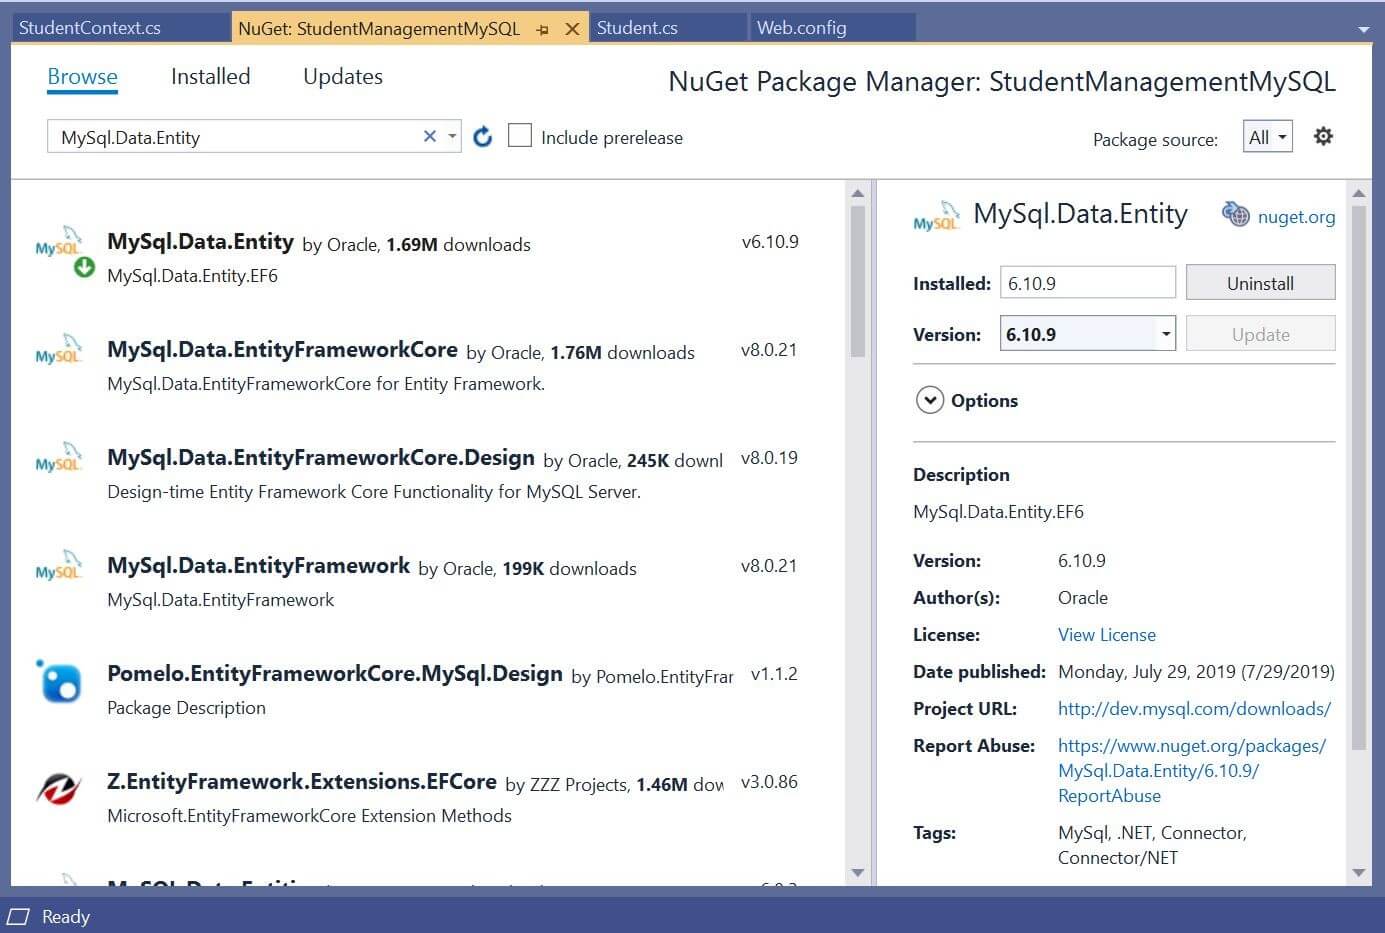 Install the NuGet package MySql.Data.Entity